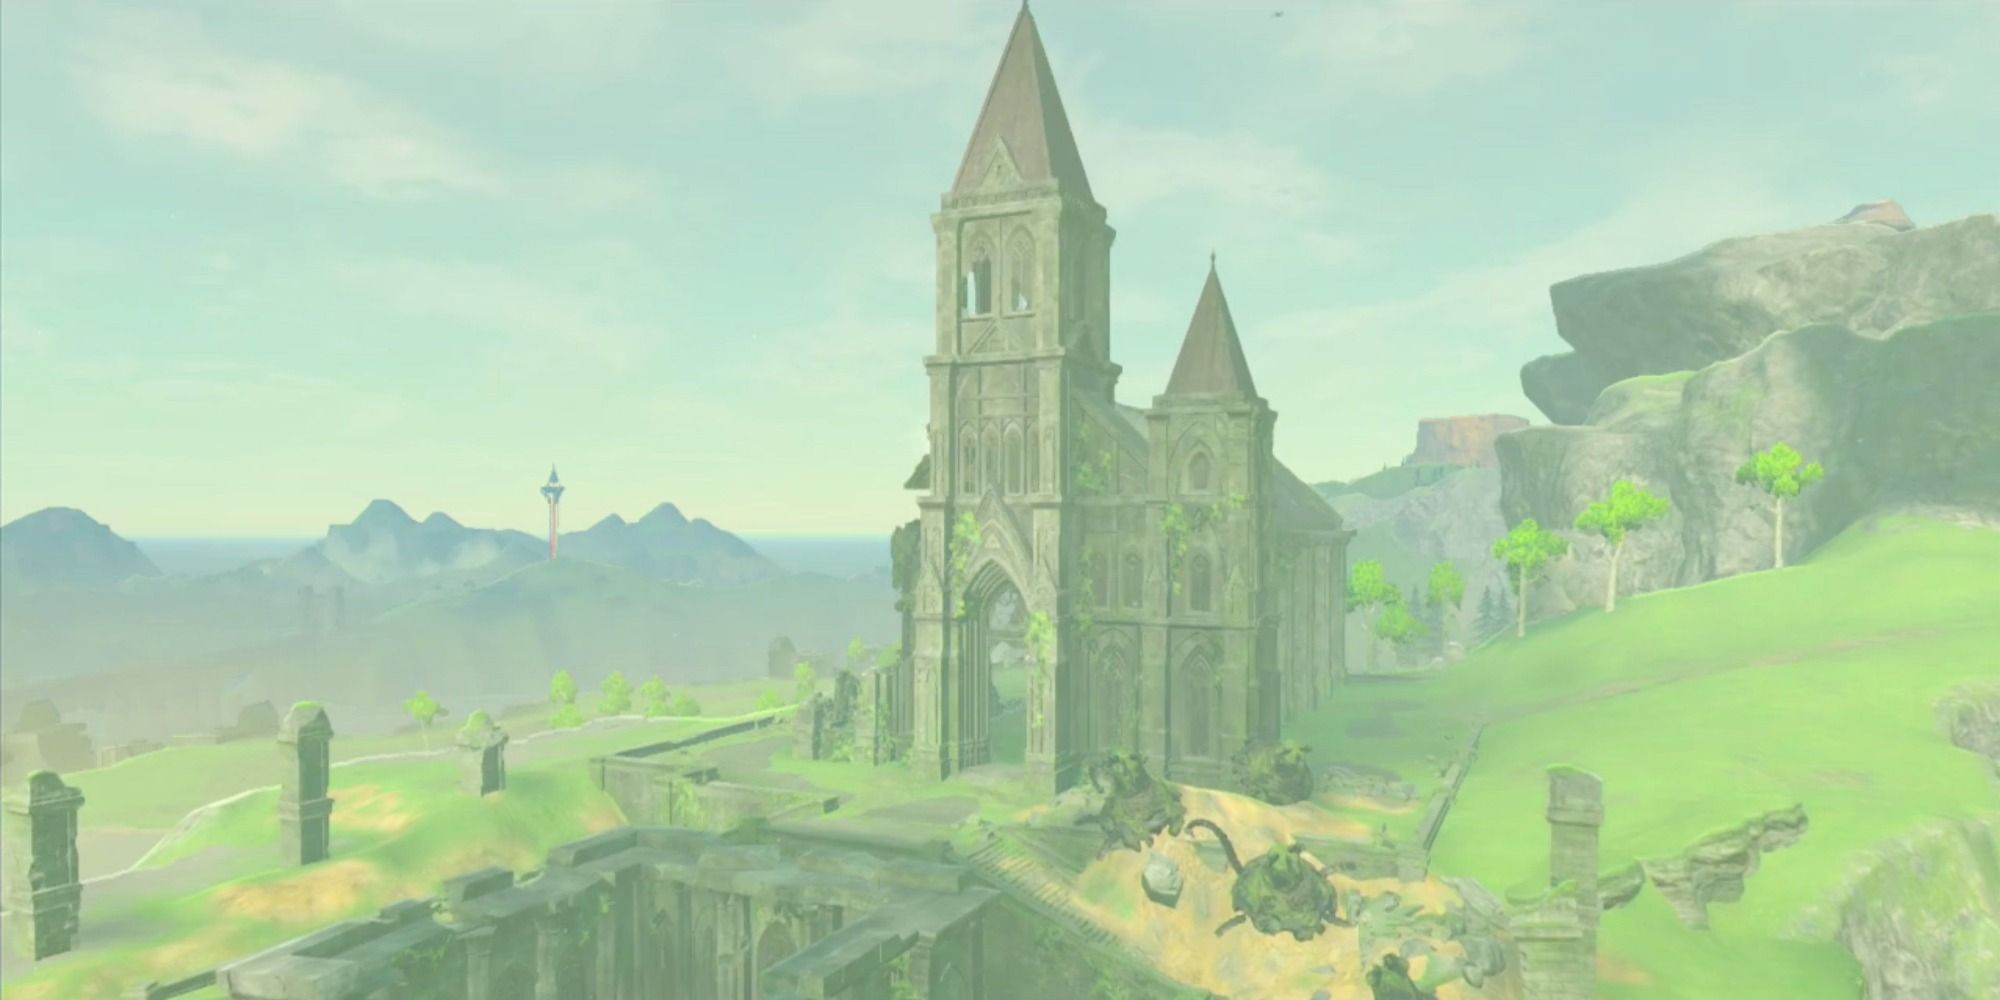 A screenshot showing the Temple of Time in The Legend of Zelda: Breath of the Wild